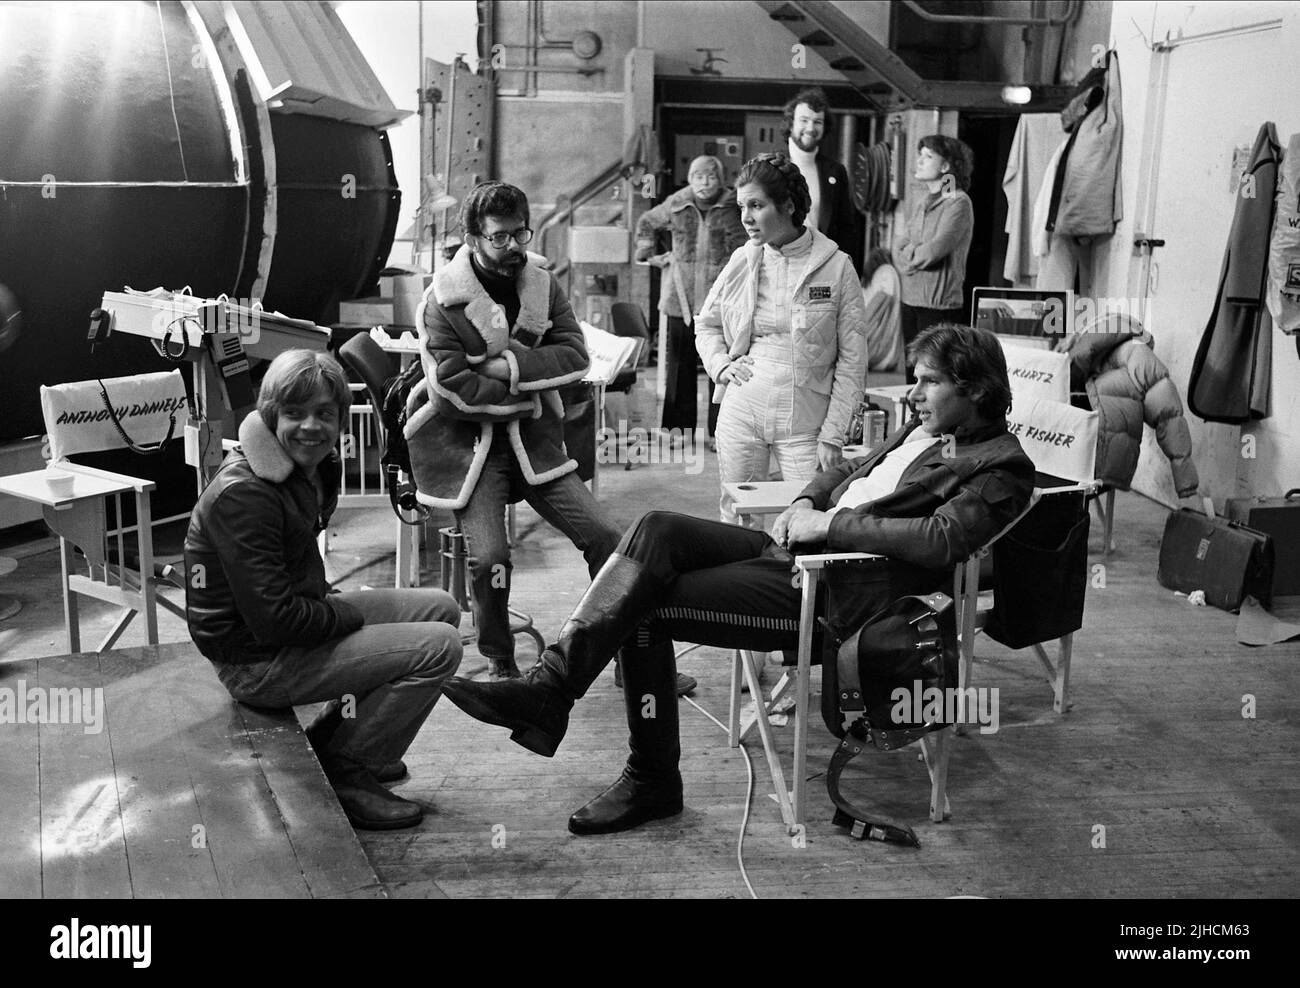 MARK HAMILL, George lucas, Carrie Fisher, Harrison Ford, Star Wars: Episodio V - l'impero colpisce ancora, 1980 Foto Stock